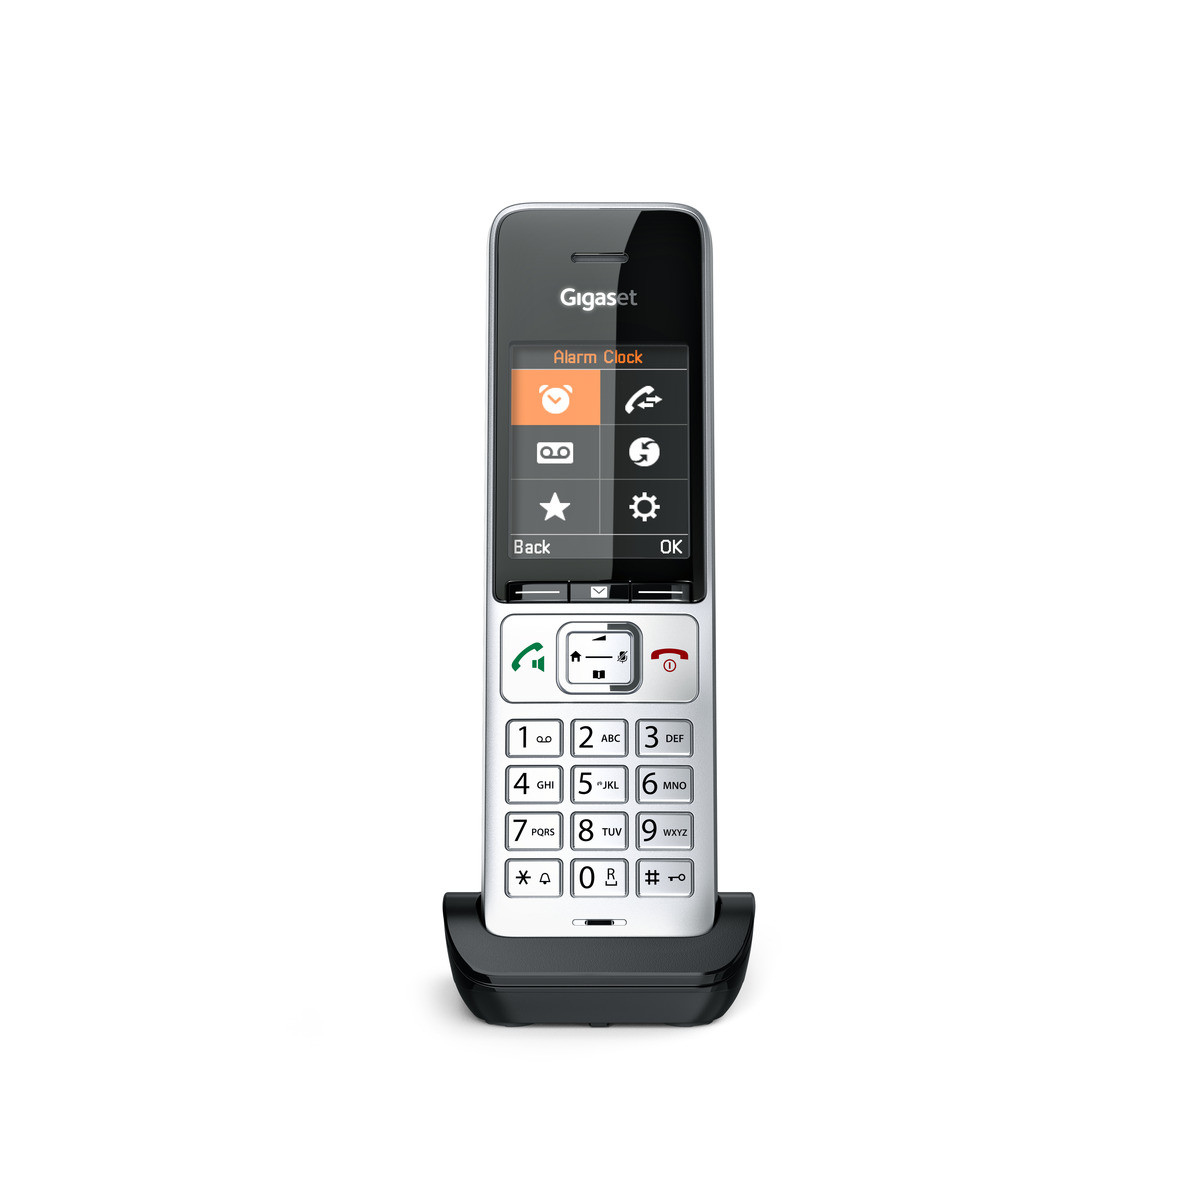 S30852-H3061-R101 UNIFY GIGASET OPENSTAGE COMFORT 500HX - Analog/DECT telephone - Wired handset - Speakerphone - 200 entries - Caller ID - Black - Silver